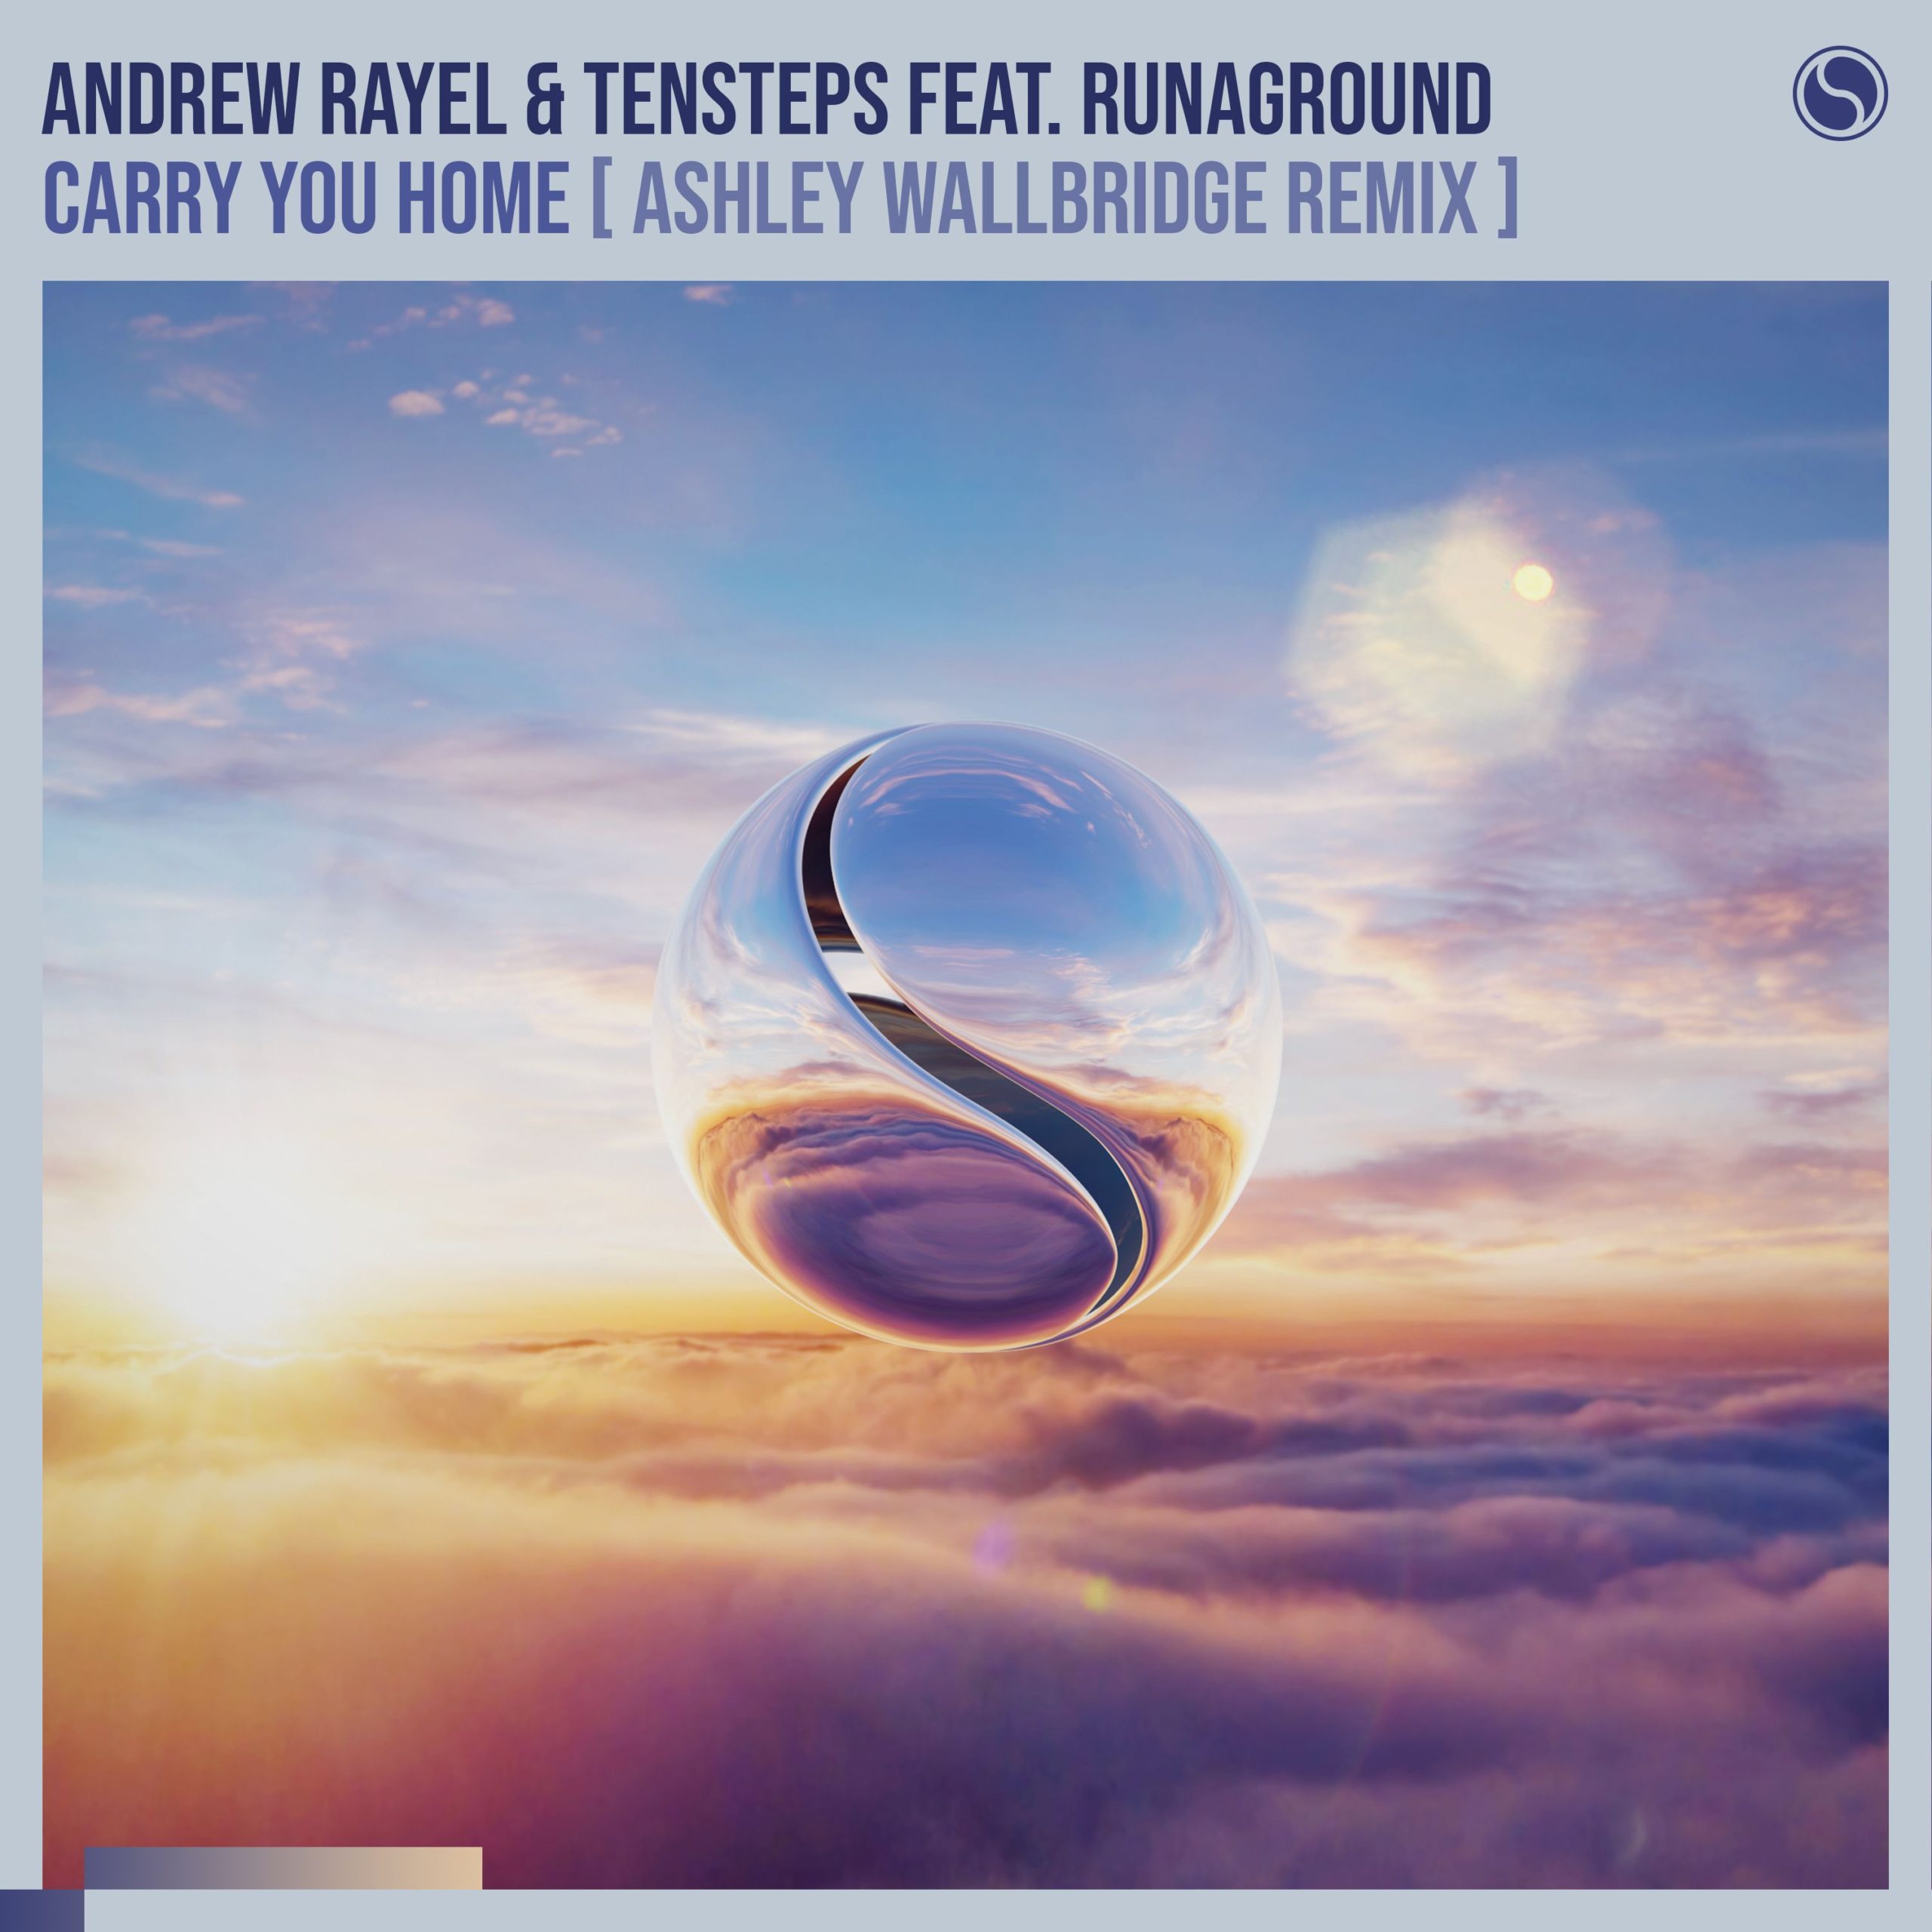 Andrew Rayel and Tensteps feat. RUNAGROUND presents Carry You Home (Ashley Wallbridge Remix) on inHarmony Music